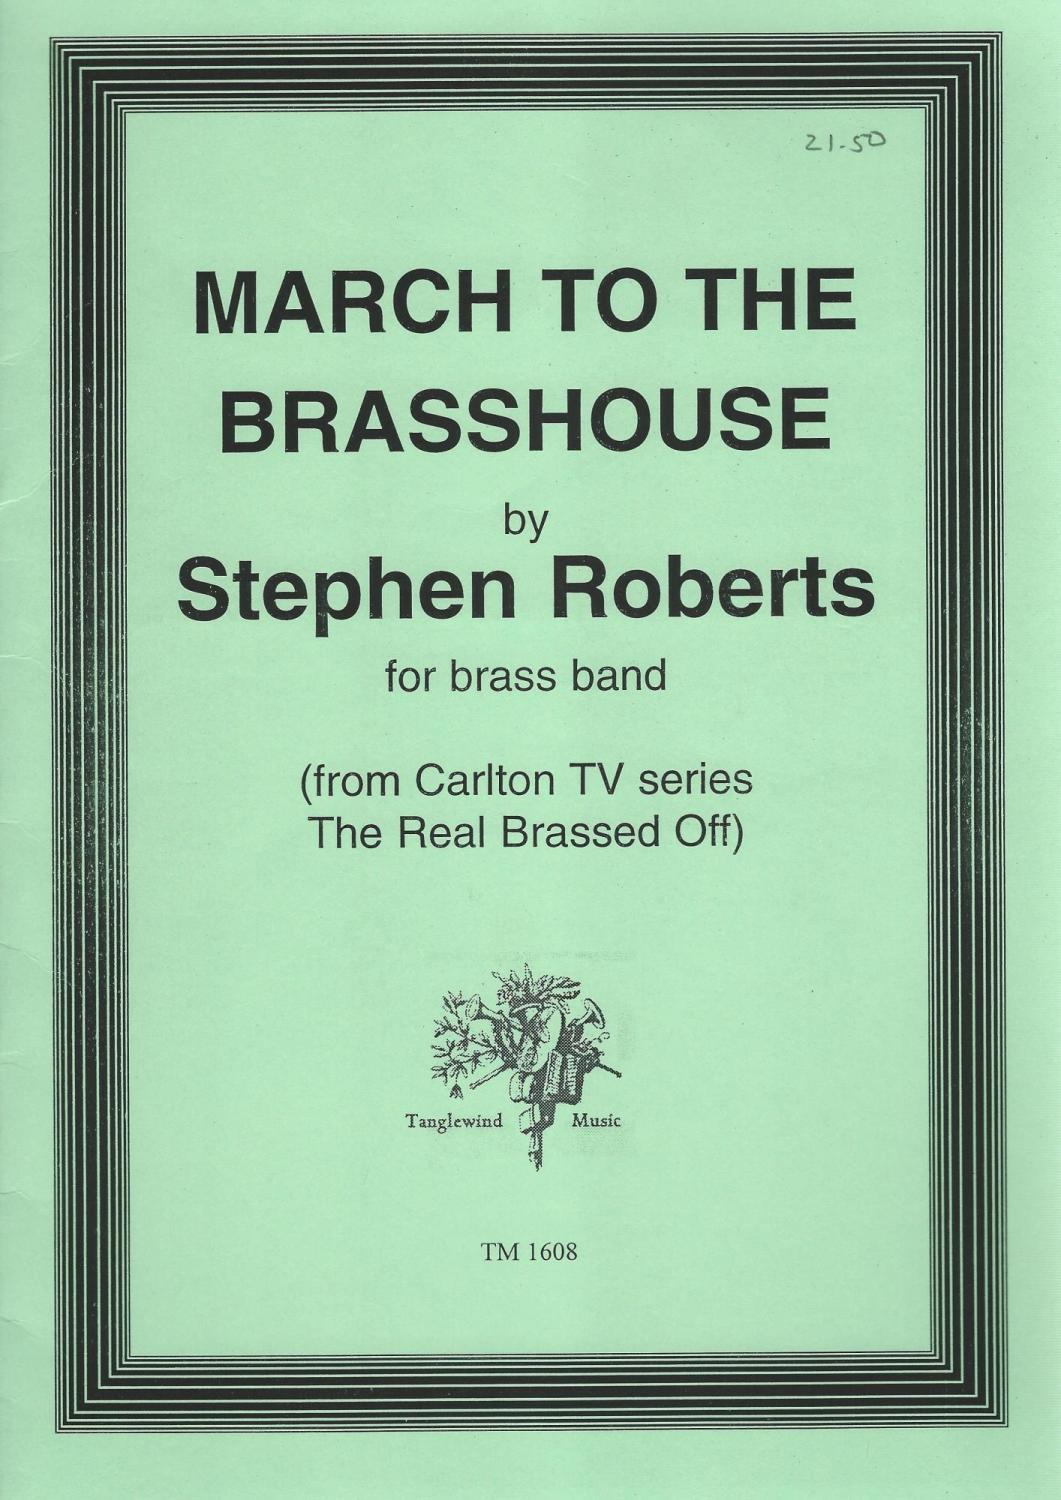 March to the Brasshouse for Brass Band - Stephen Roberts